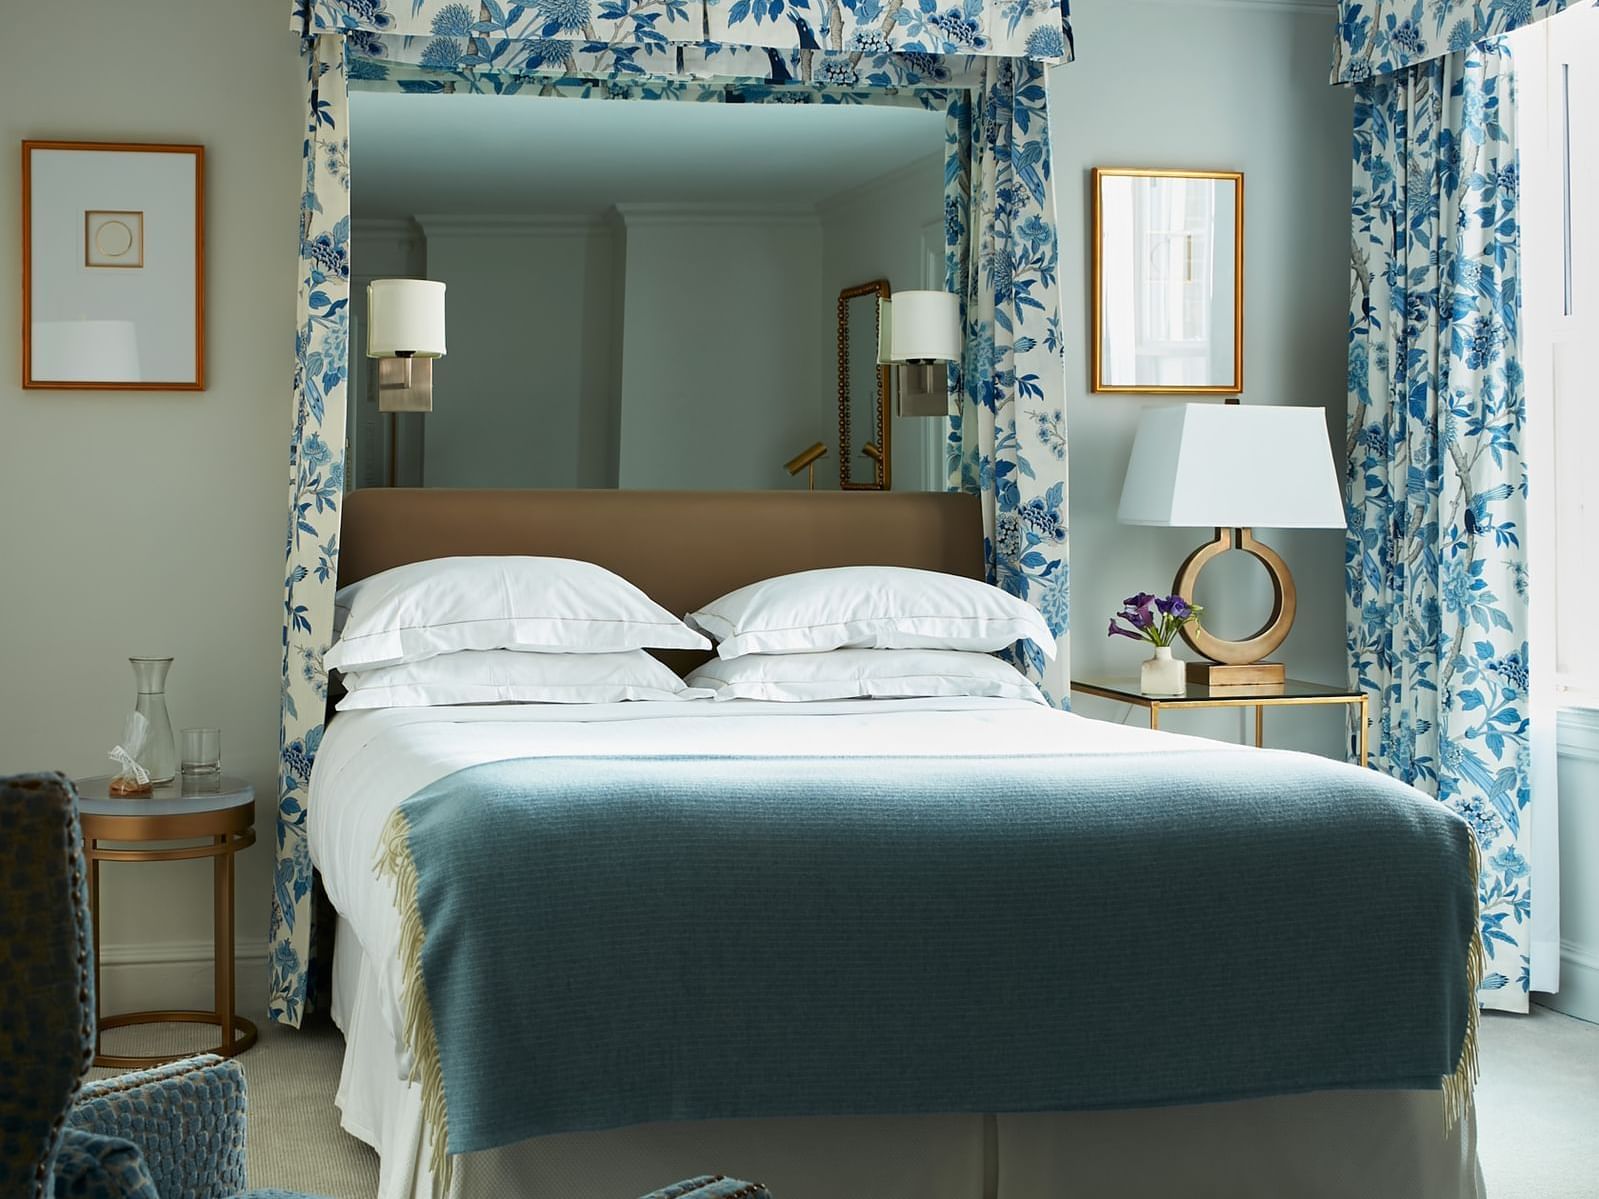 Deluxe Guestroom with king bed, pillows & curtains at The Eliot Hotel, historic Boston hotels